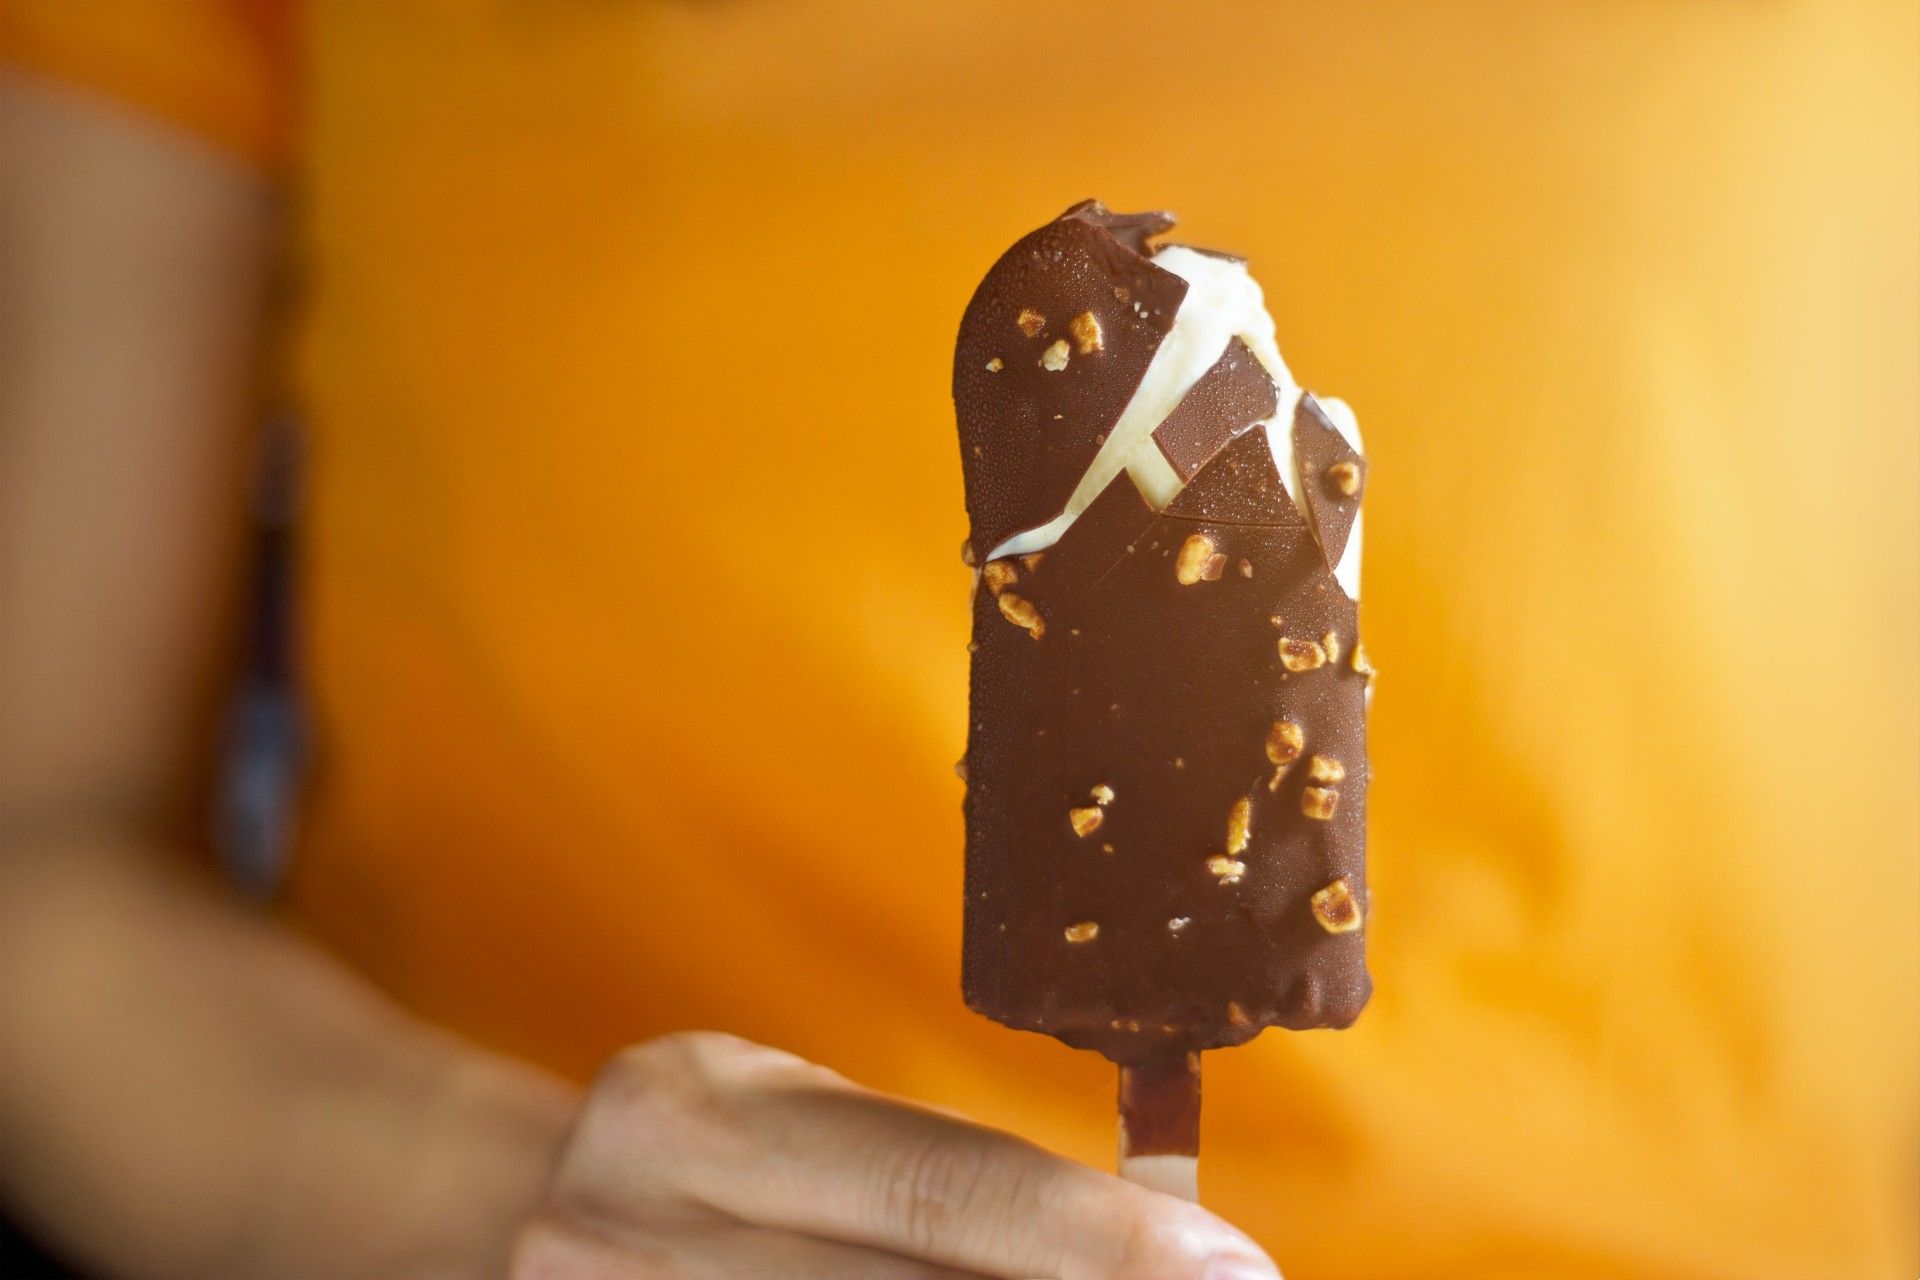 A person in a yellow shirt holds an ice cream bar dipped in chocolate and nuts - Whole Foods ice cream